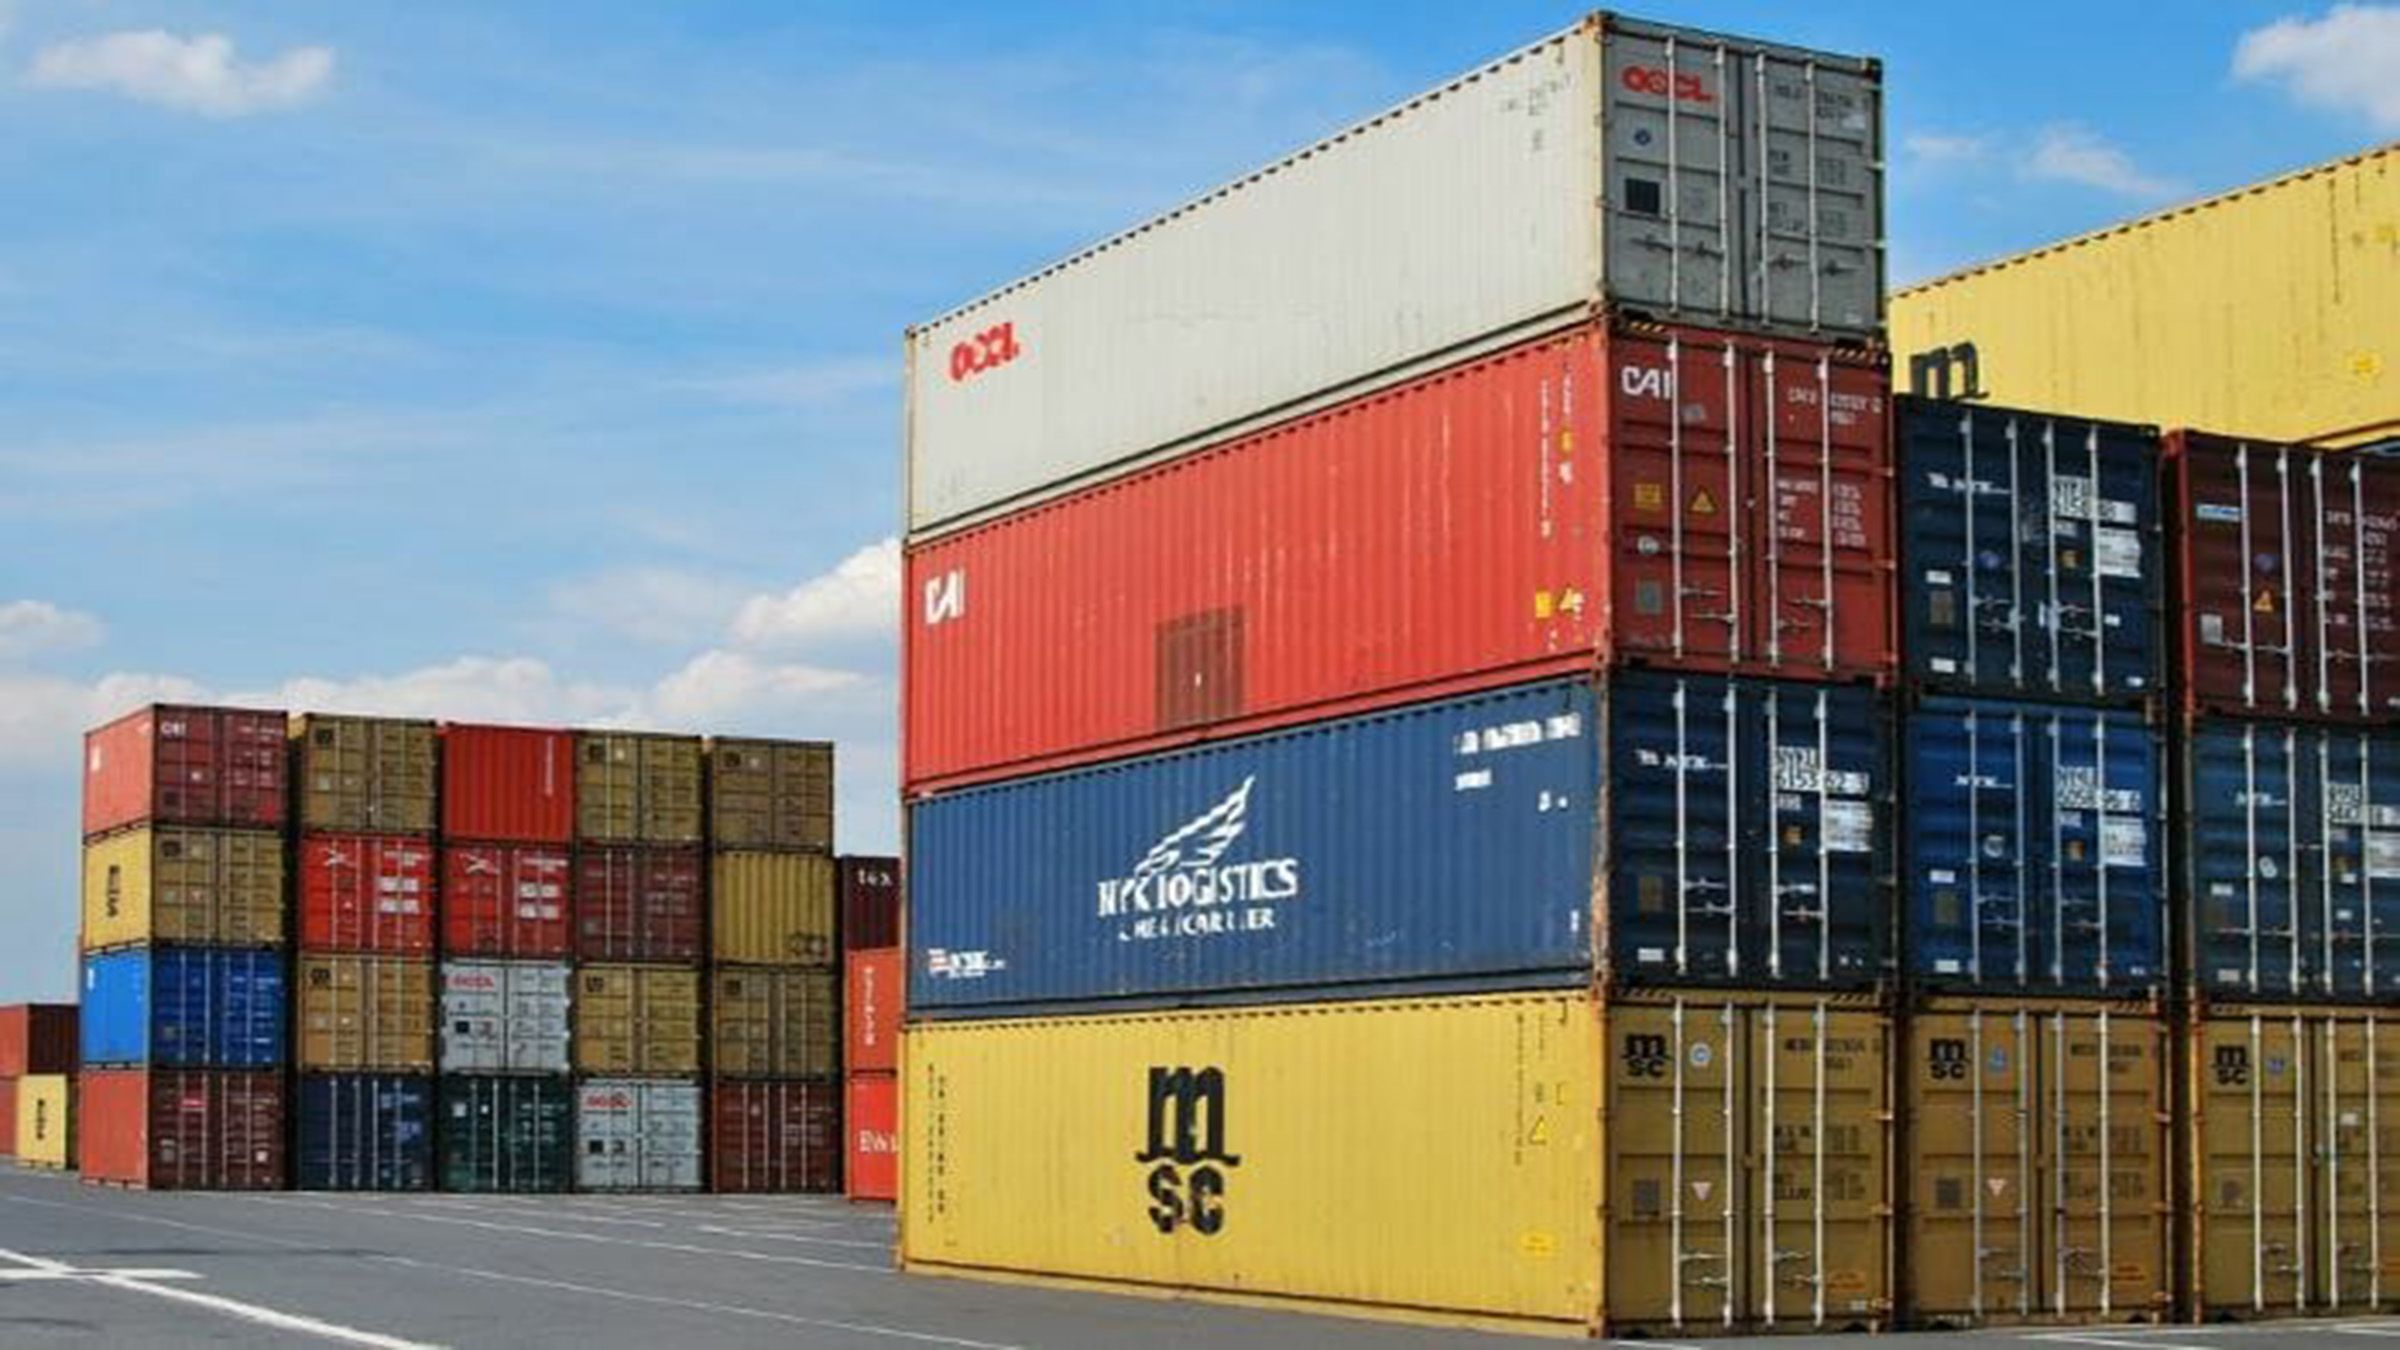 January trade gap widest in 5 months